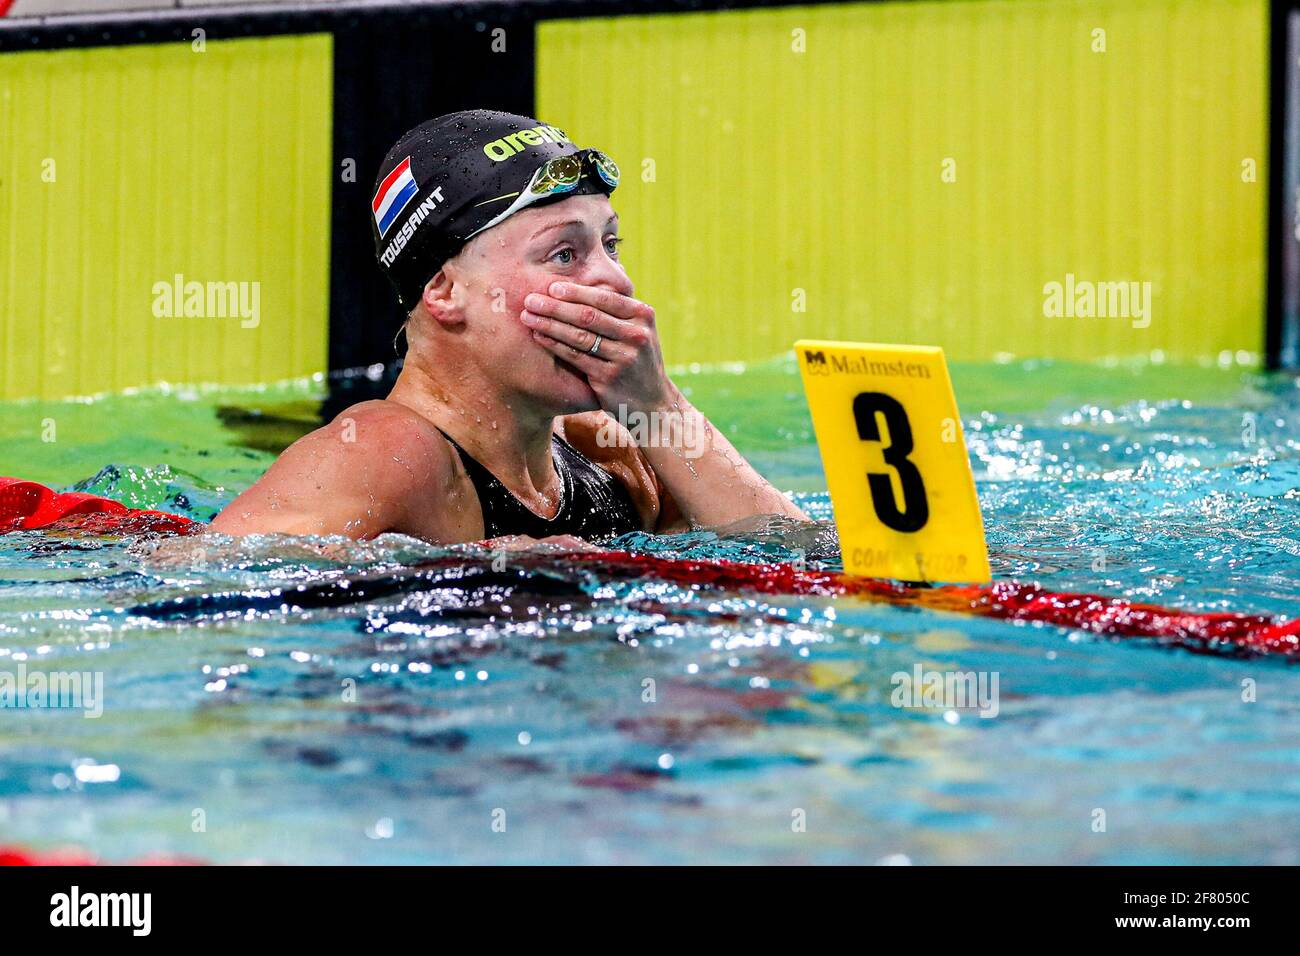 Eindhoven Netherlands April 10 Kira Toussaint Celebrating European Record In The Women 50m Backstroke Finals During The Eindhoven Qualification Me Stock Photo Alamy